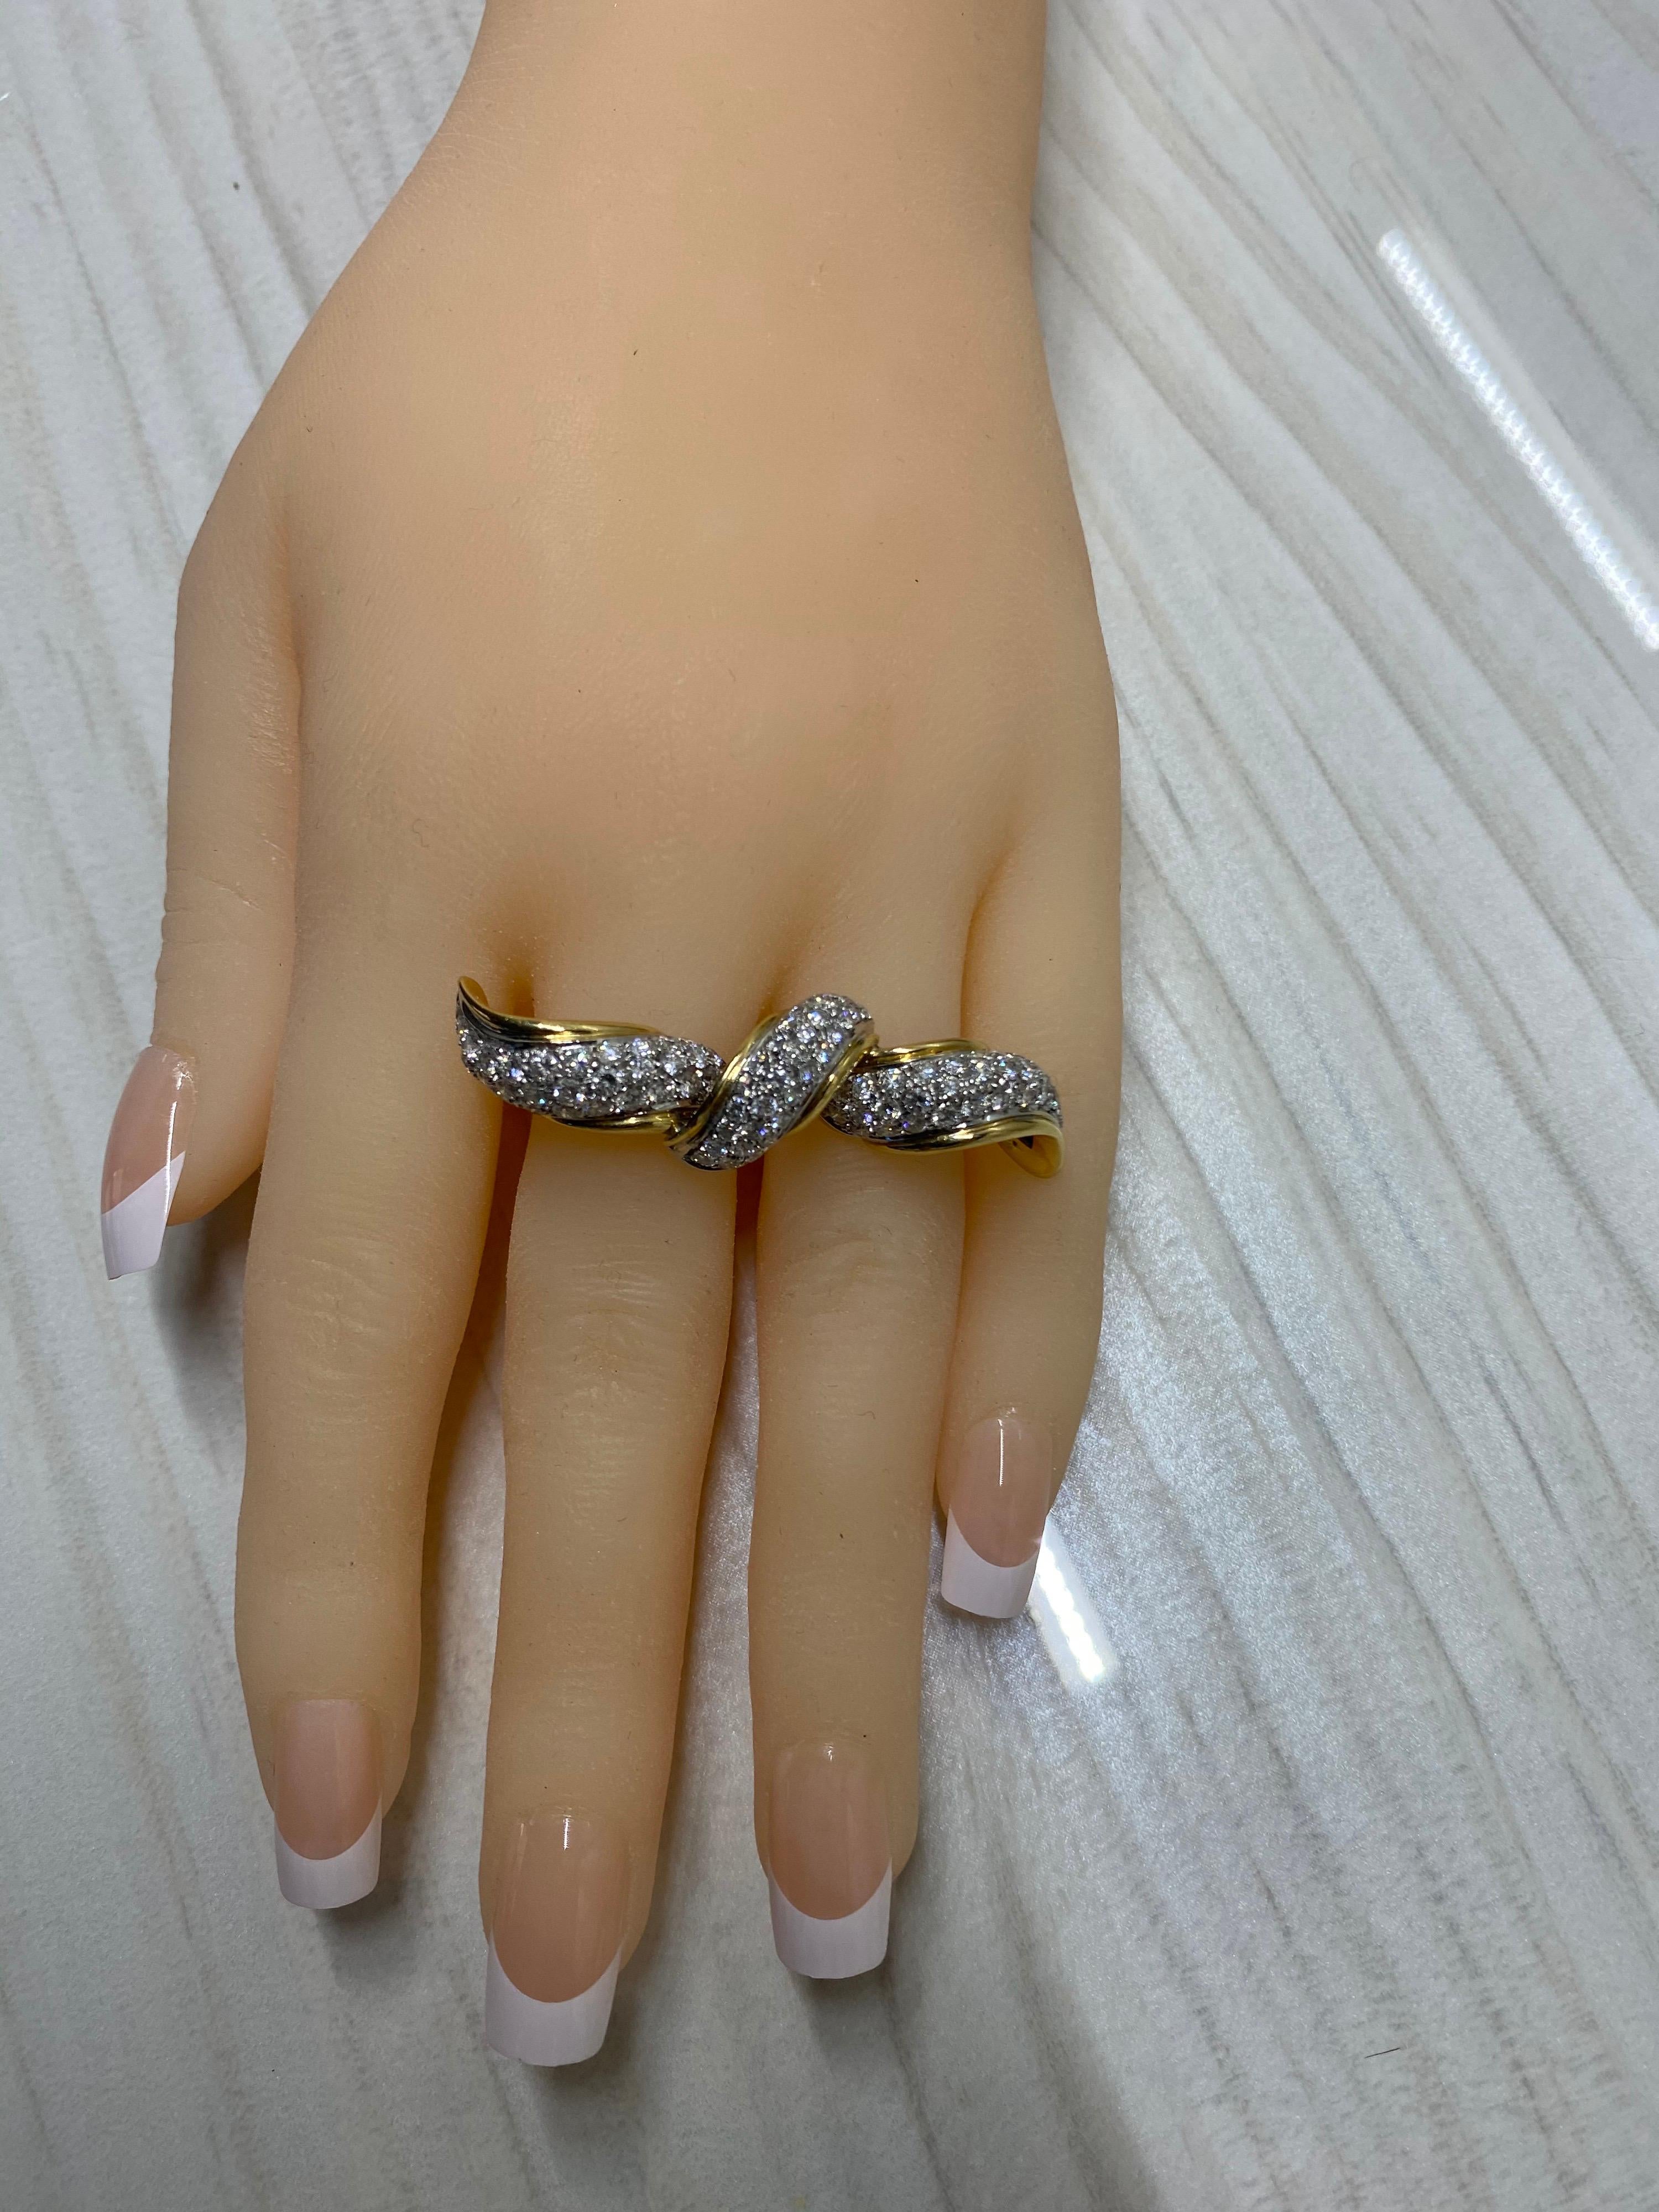 It doesn’t get more glamorous! Unique, blazing with approximately 3.75-4 carat of brilliant cut white VS diamonds set in 18k white gold bordered in 18k polished yellow gold. Diamond bow is estate, Custom modern double two tone shanks.
This two